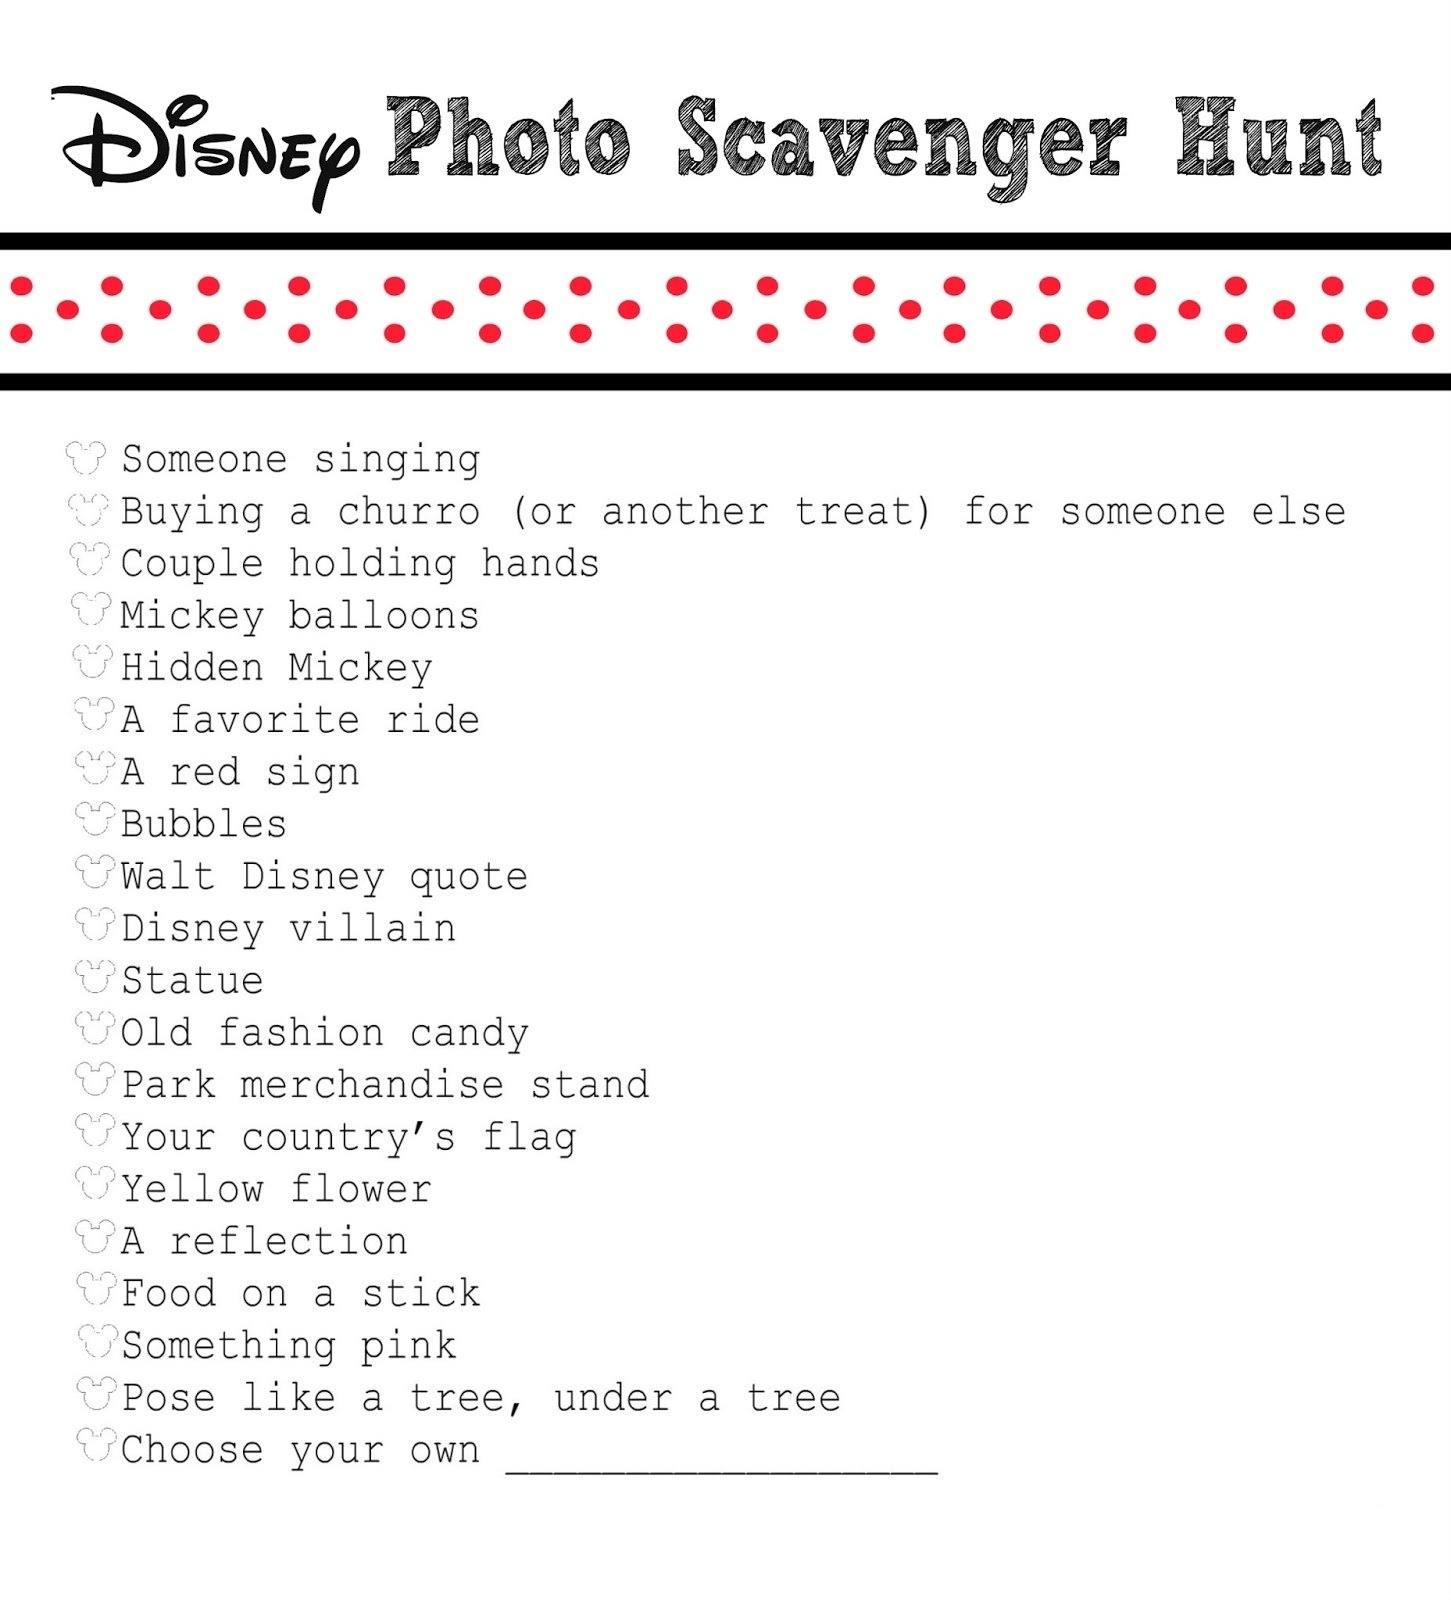 10 Most Picture Scavenger Hunt Ideas For